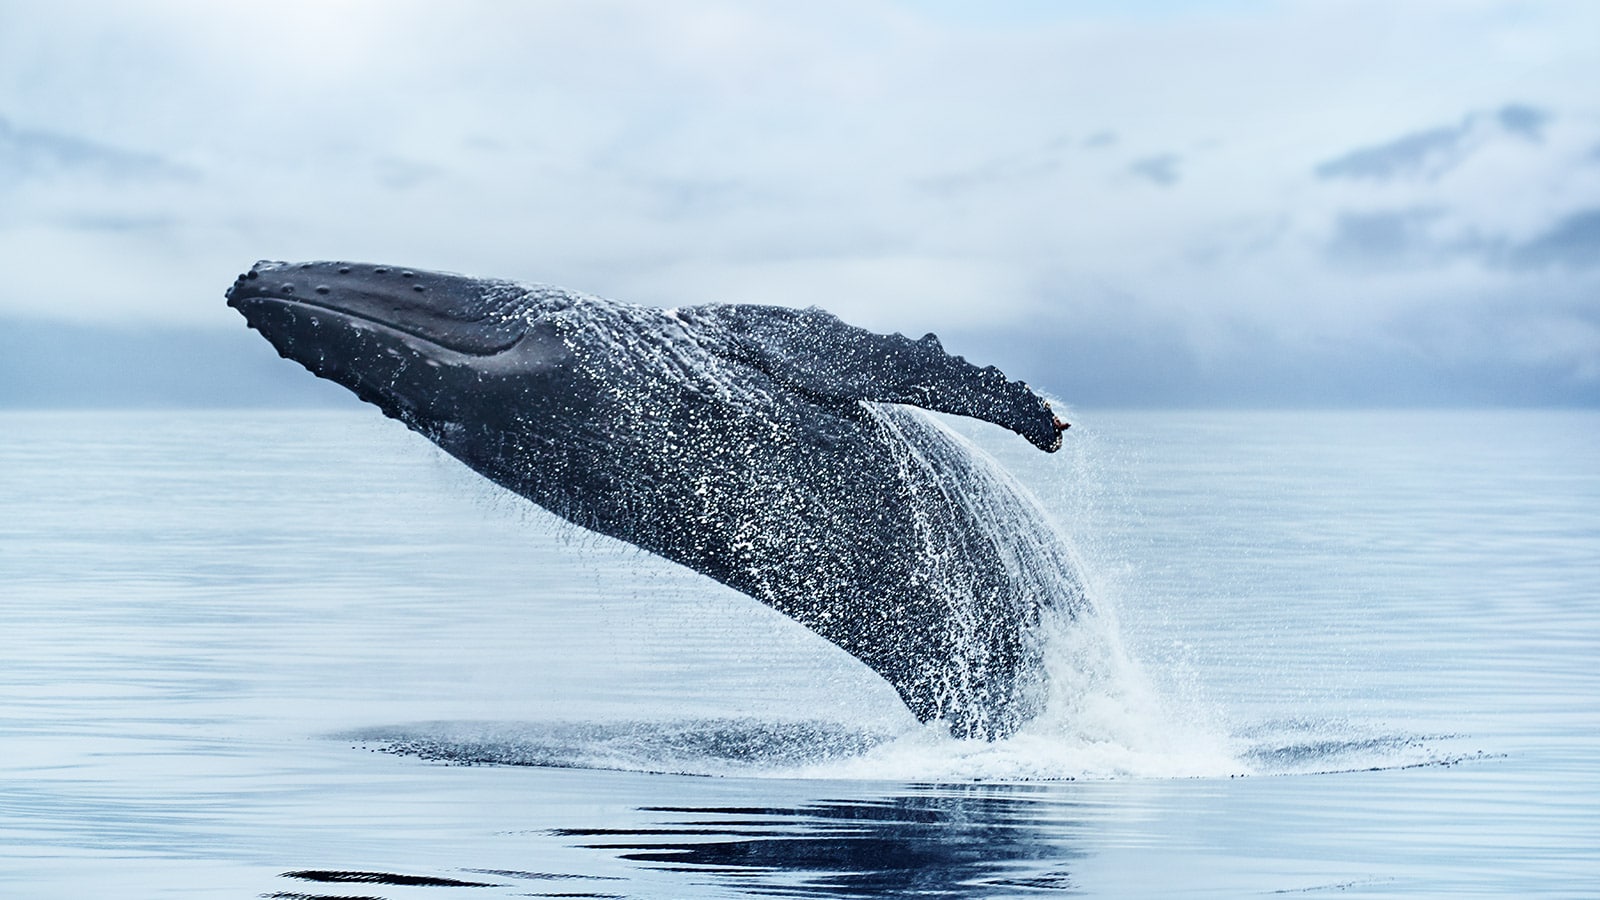 A humpback whale breaching the waters of Alaska